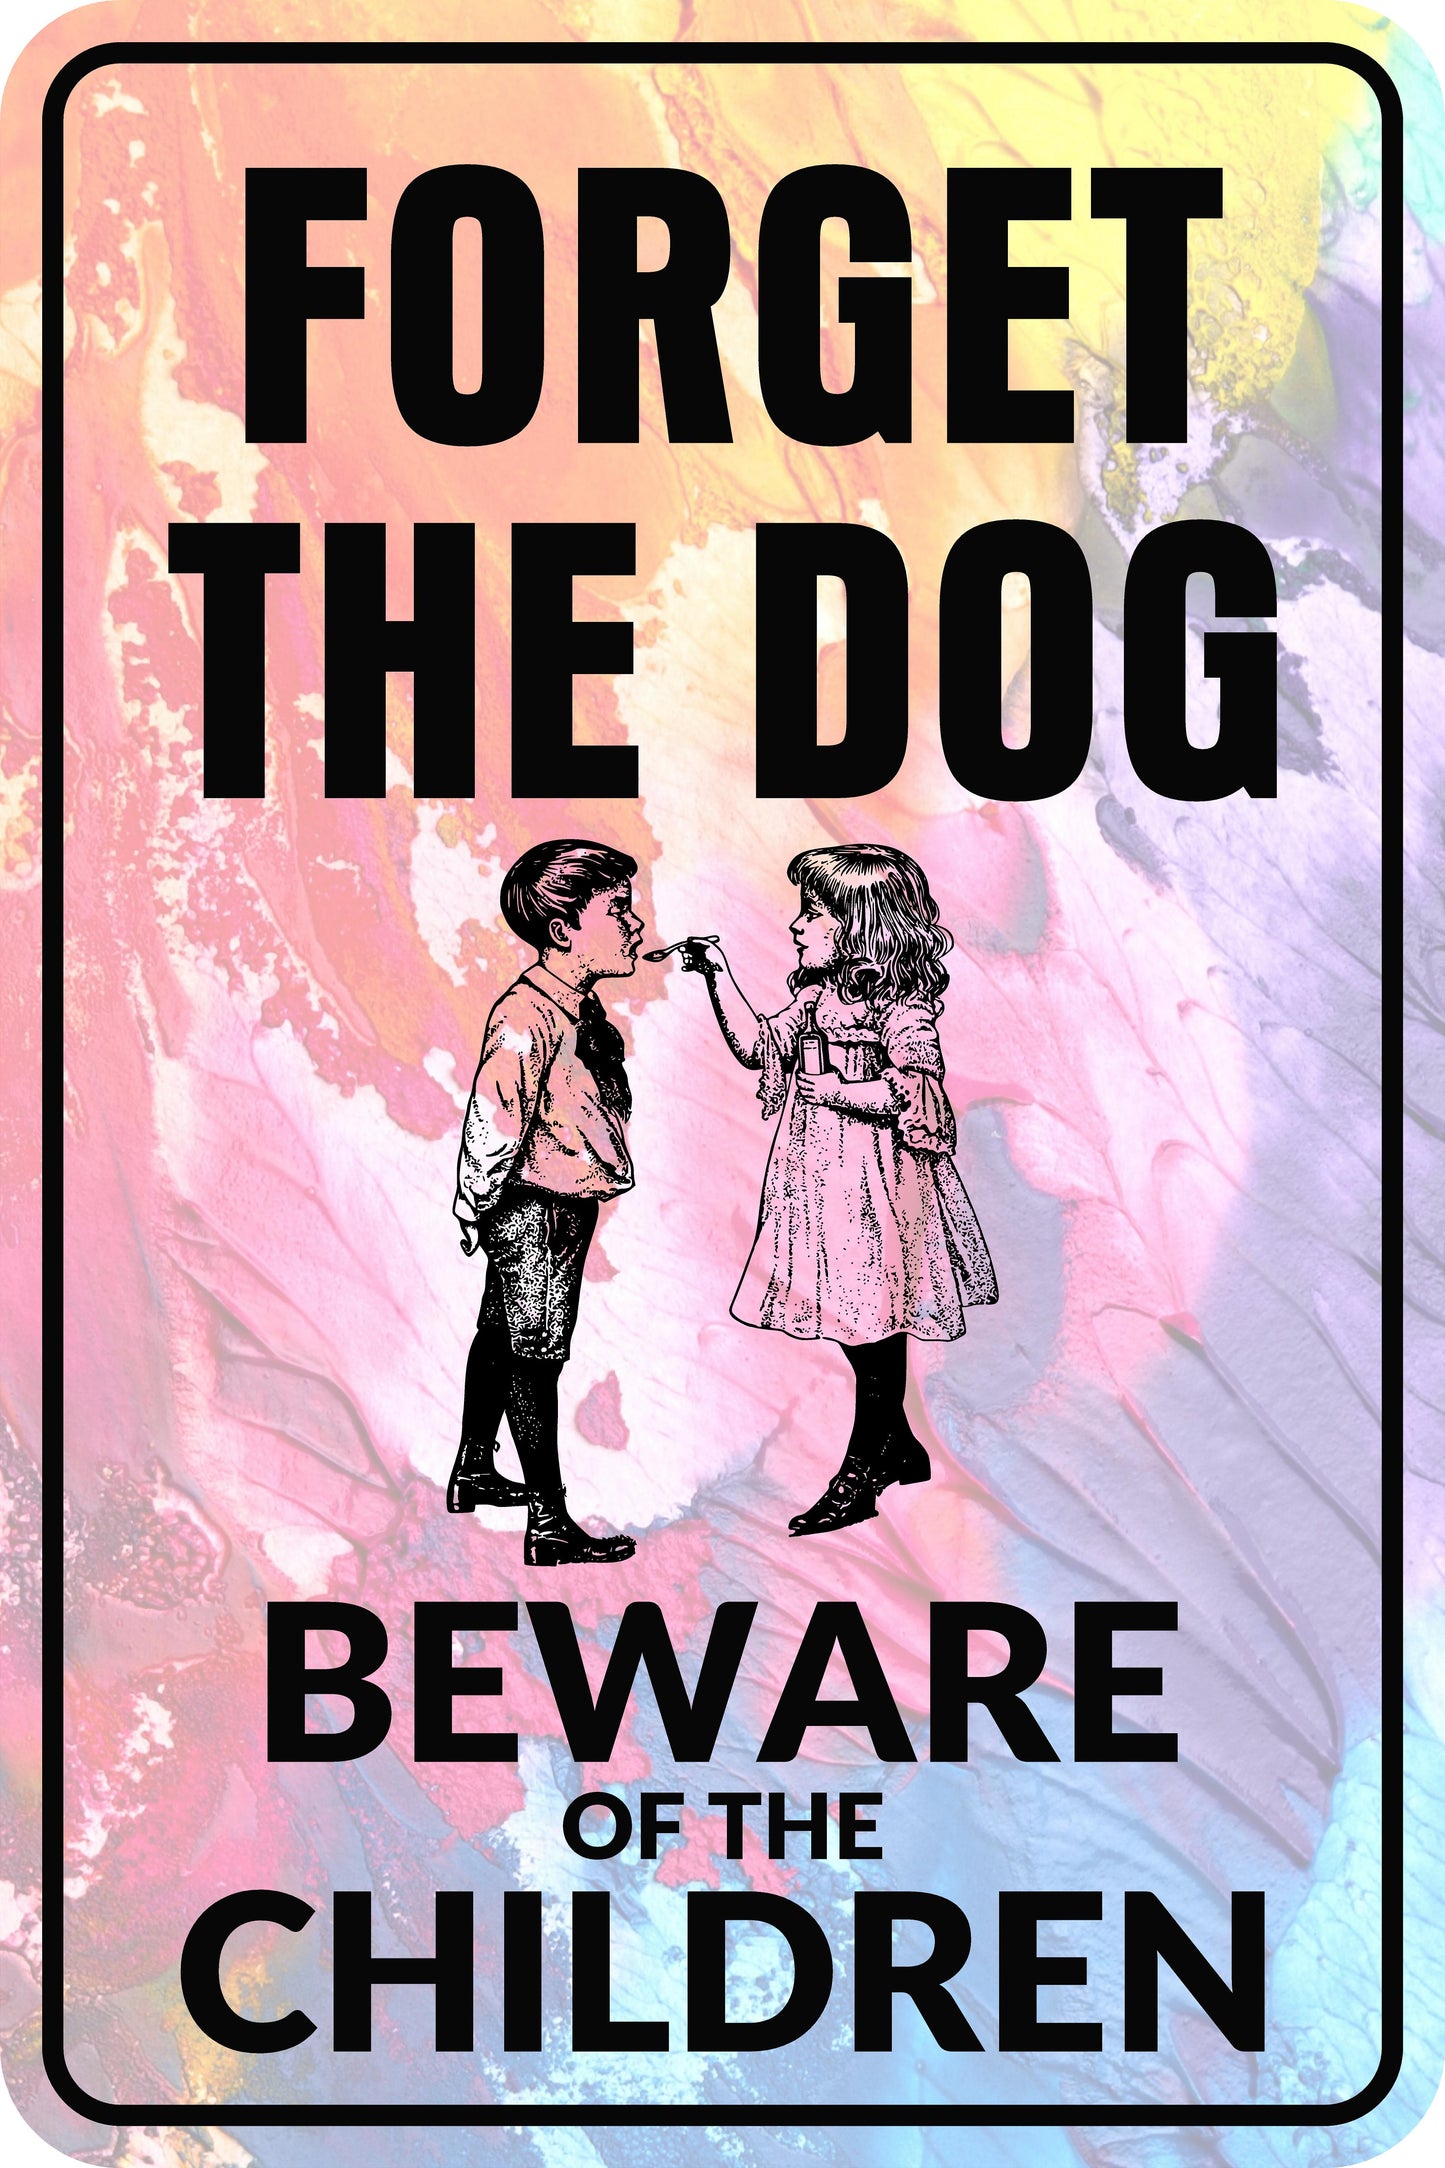 FORGET THE DOG - Sign